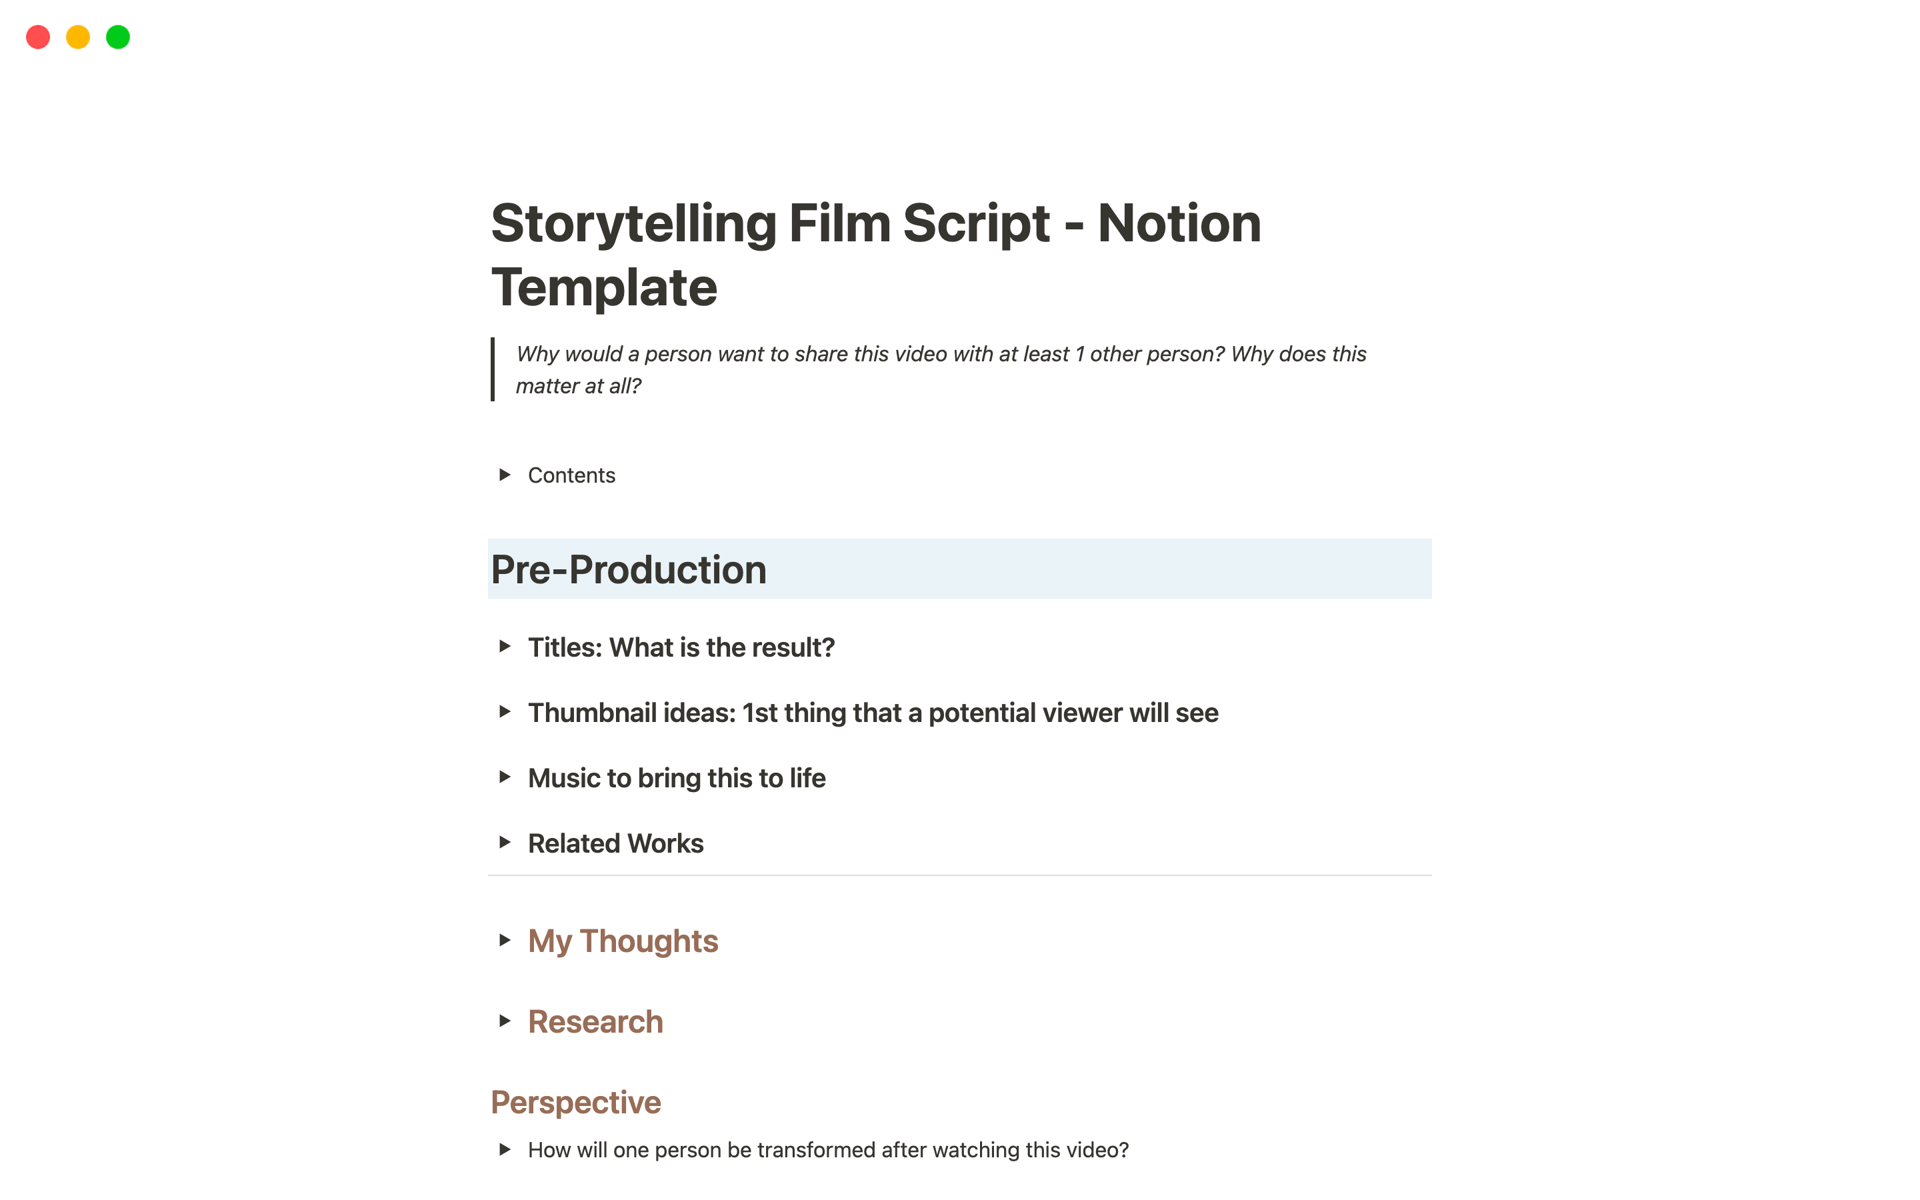 A Notion scripting template for those who want to develop the skill of storytelling through making short films or videos. 